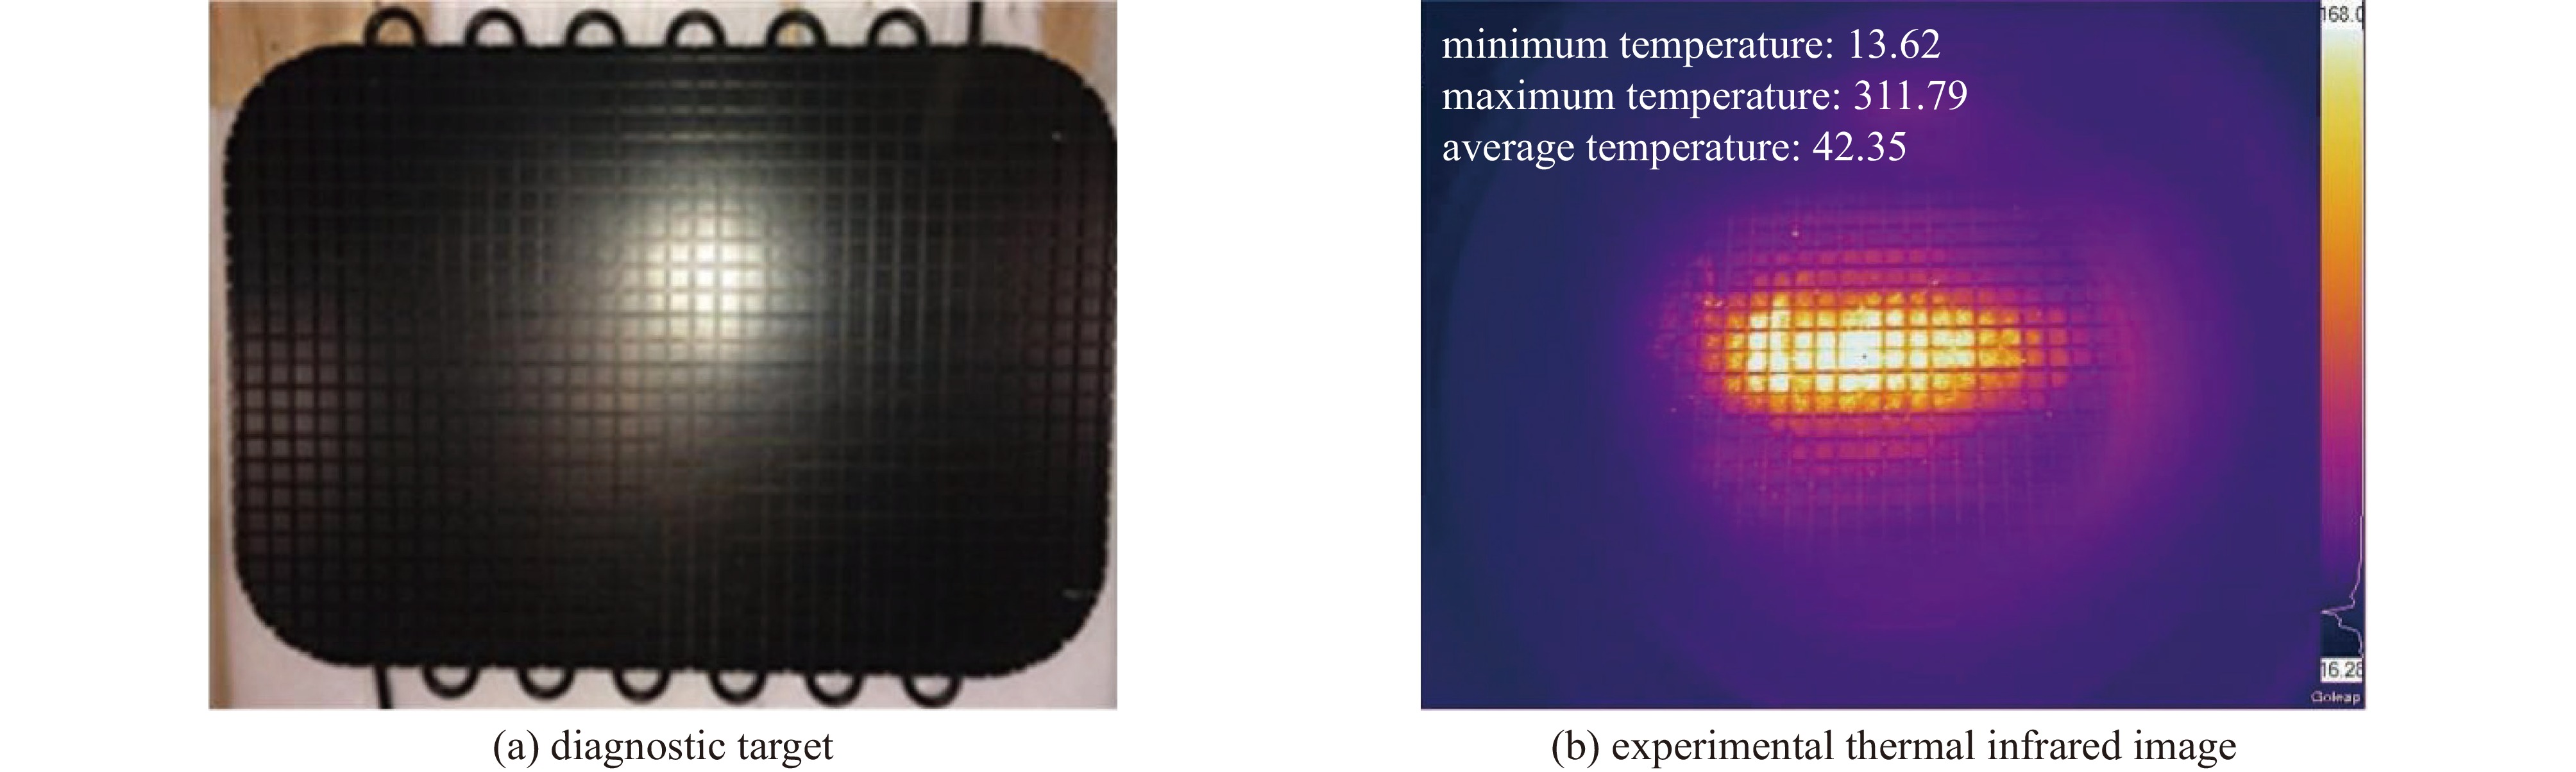 Diagnostic target and experimental thermal infrared image